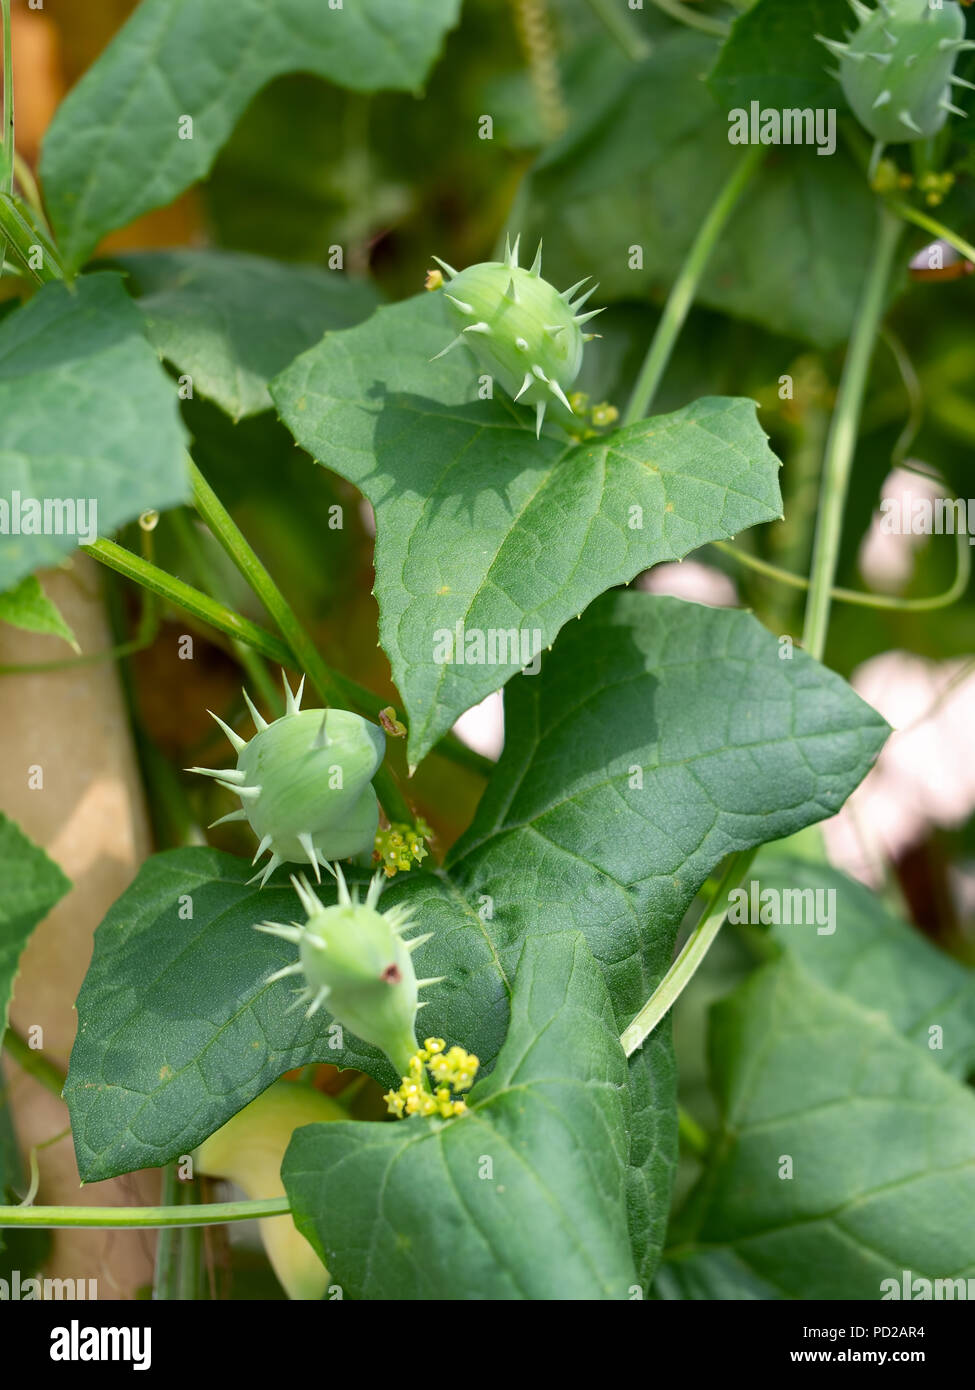 Cyclanthera brachystachya, the exploding cucumber in the cucurbit or gourd family. On vine. Fruits are bilaterally symmetrical, bulbous and spiny. Stock Photo